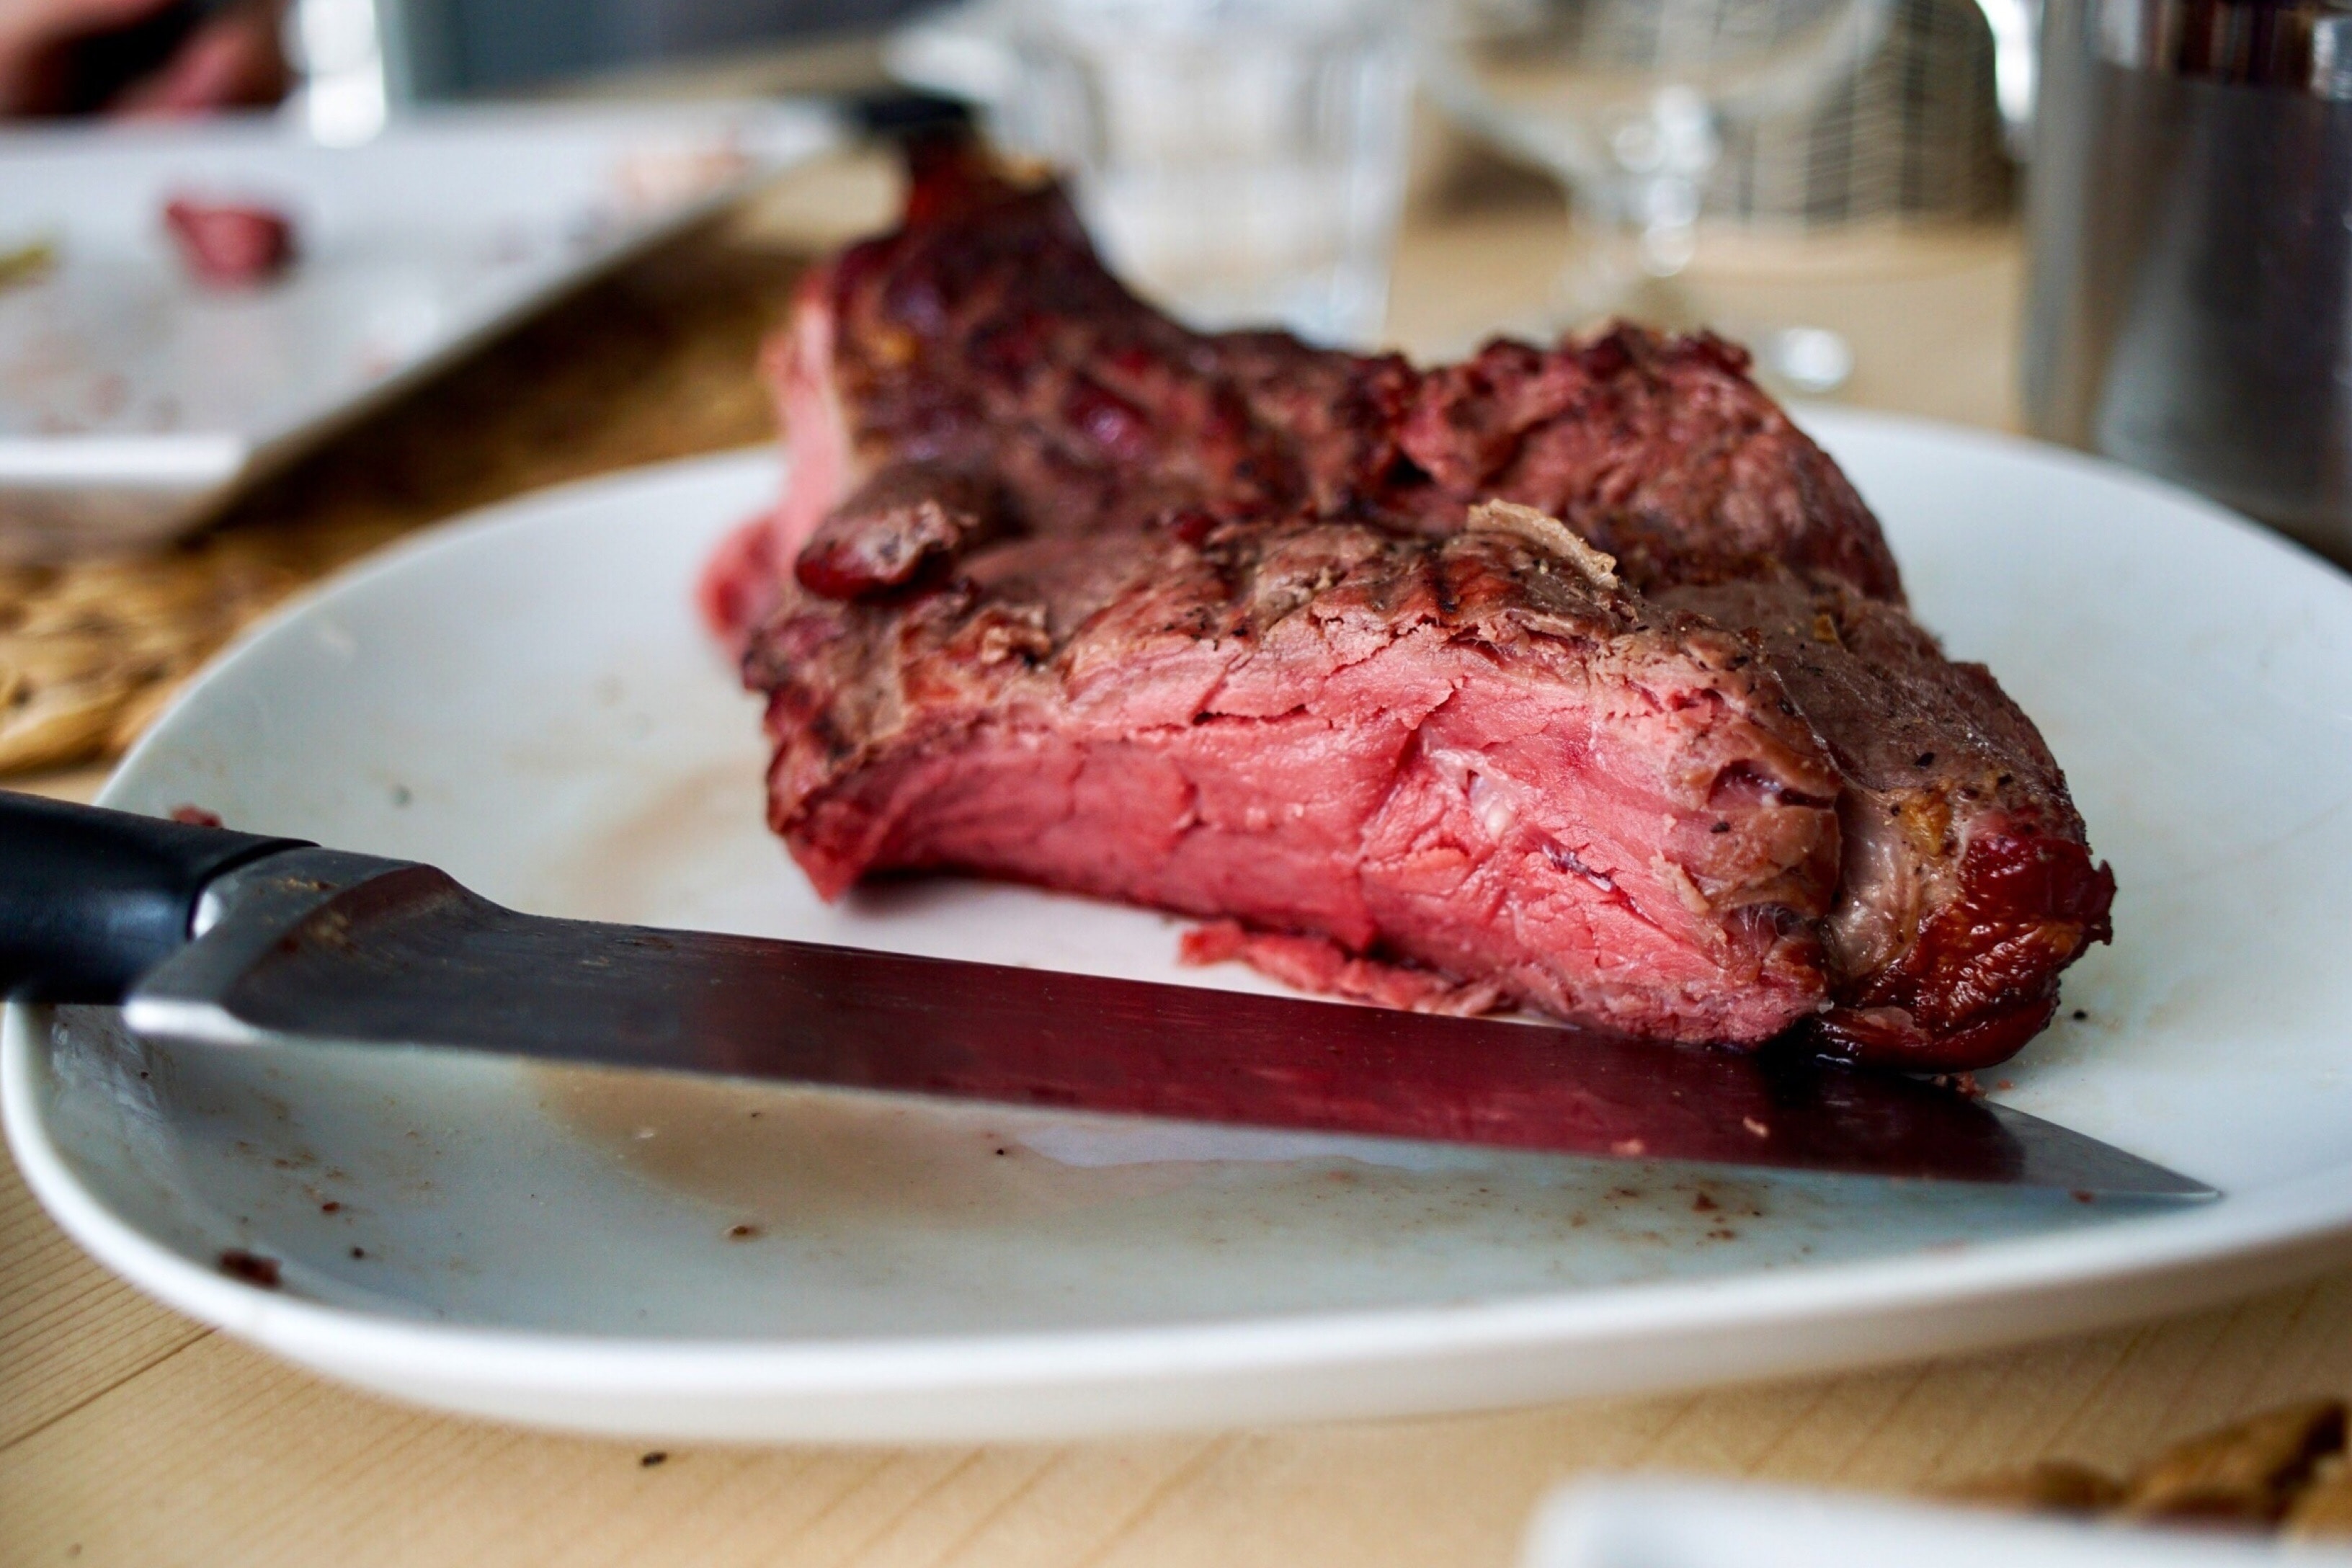 is red meat healthy?